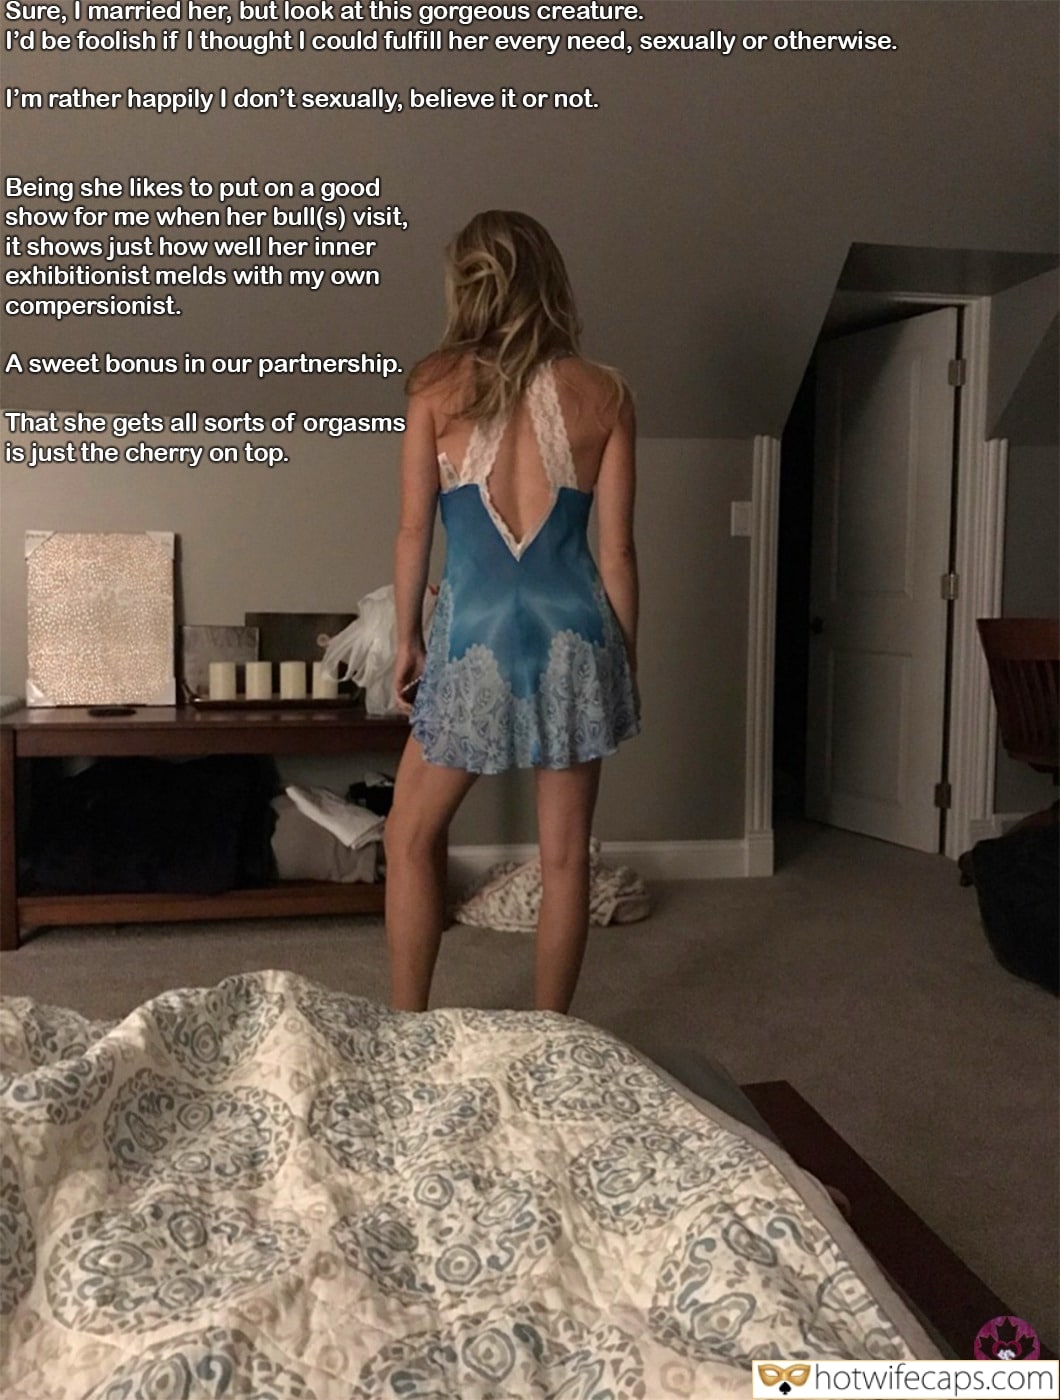 Bull, Bully, Cheating, Cuckold Stories, Sexy Memes Hotwife Caption №565134 home dress for meeting guests photo pic